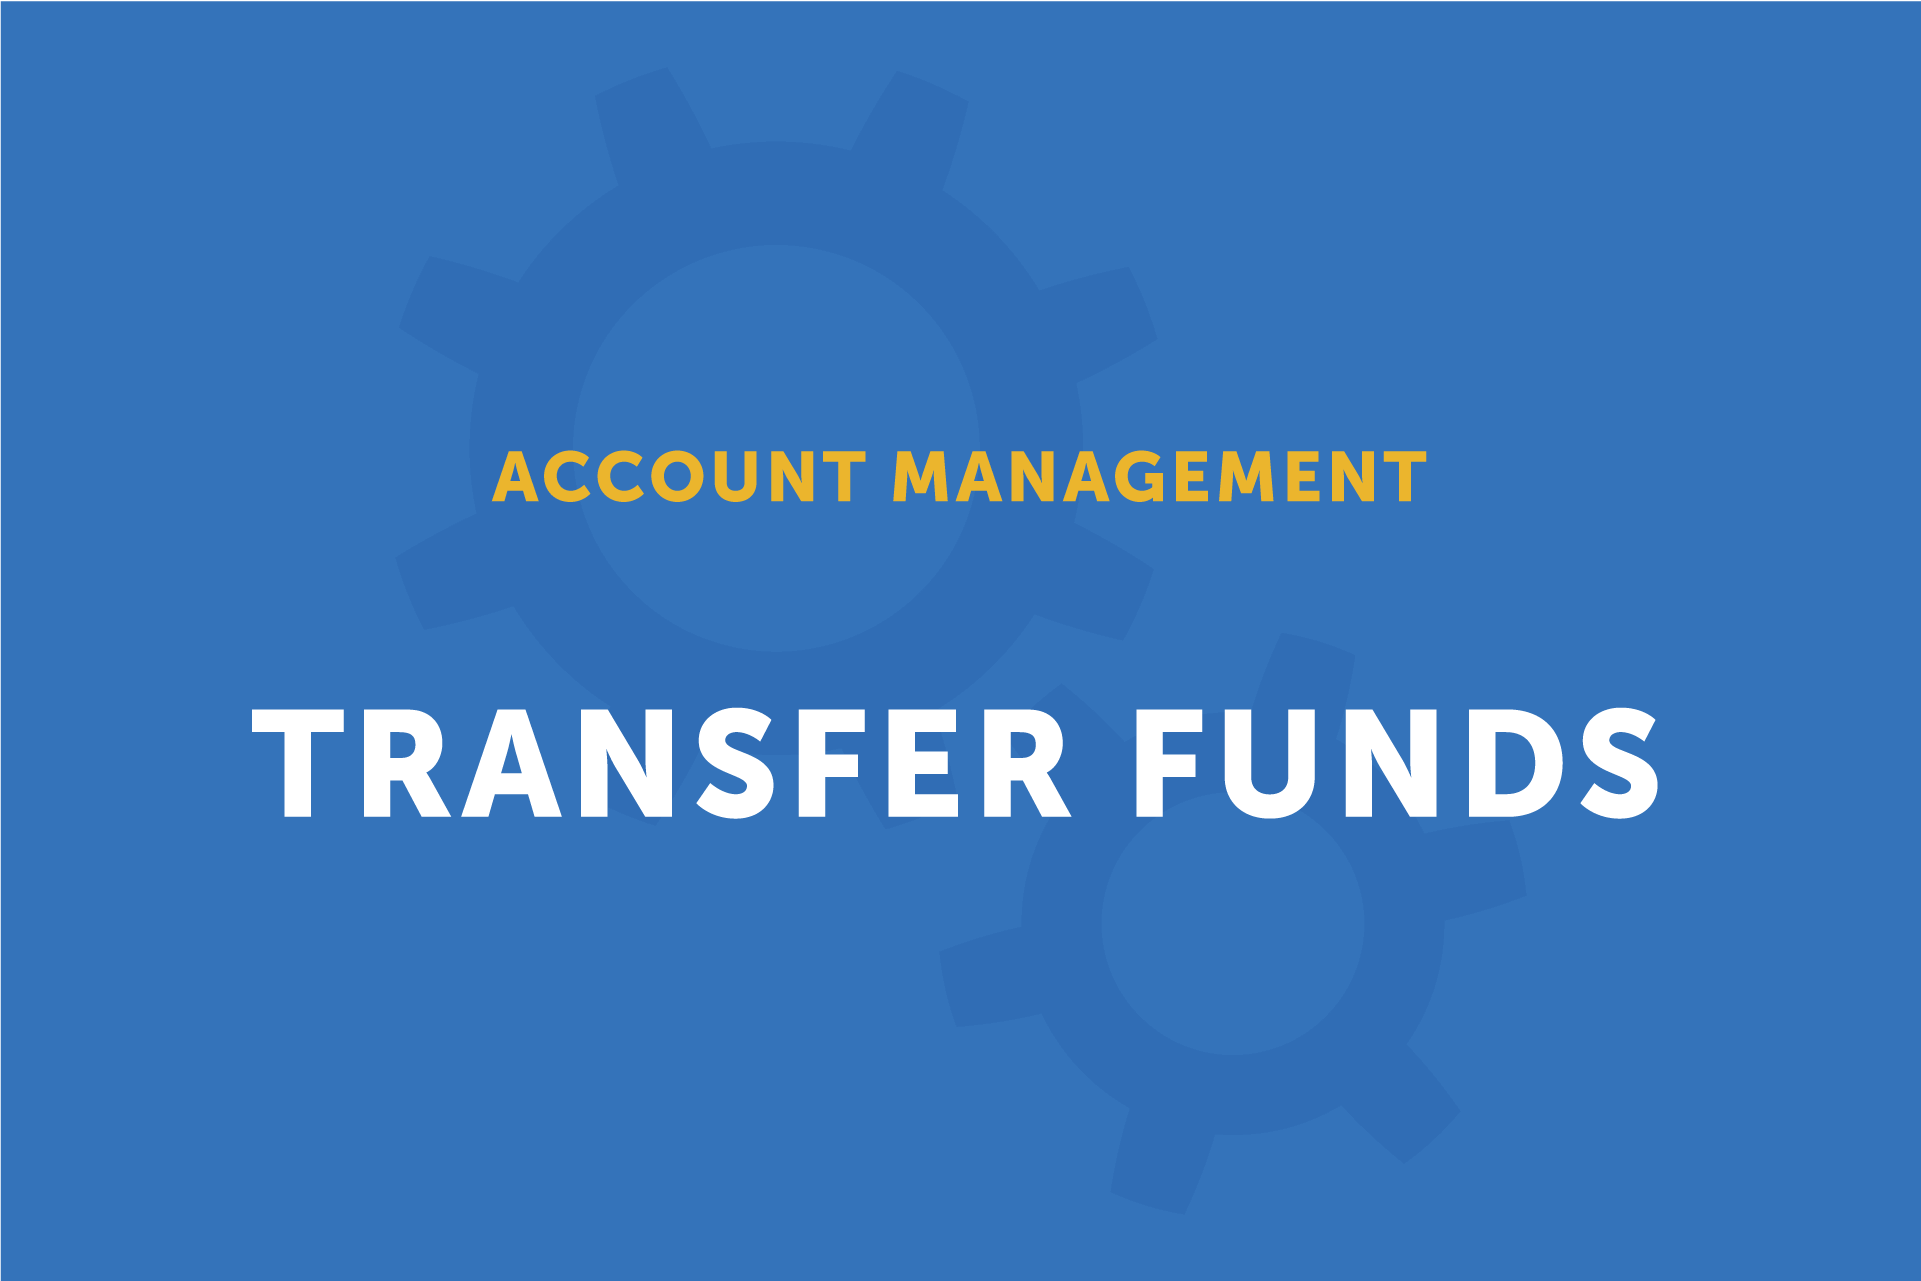 Transfer Funds